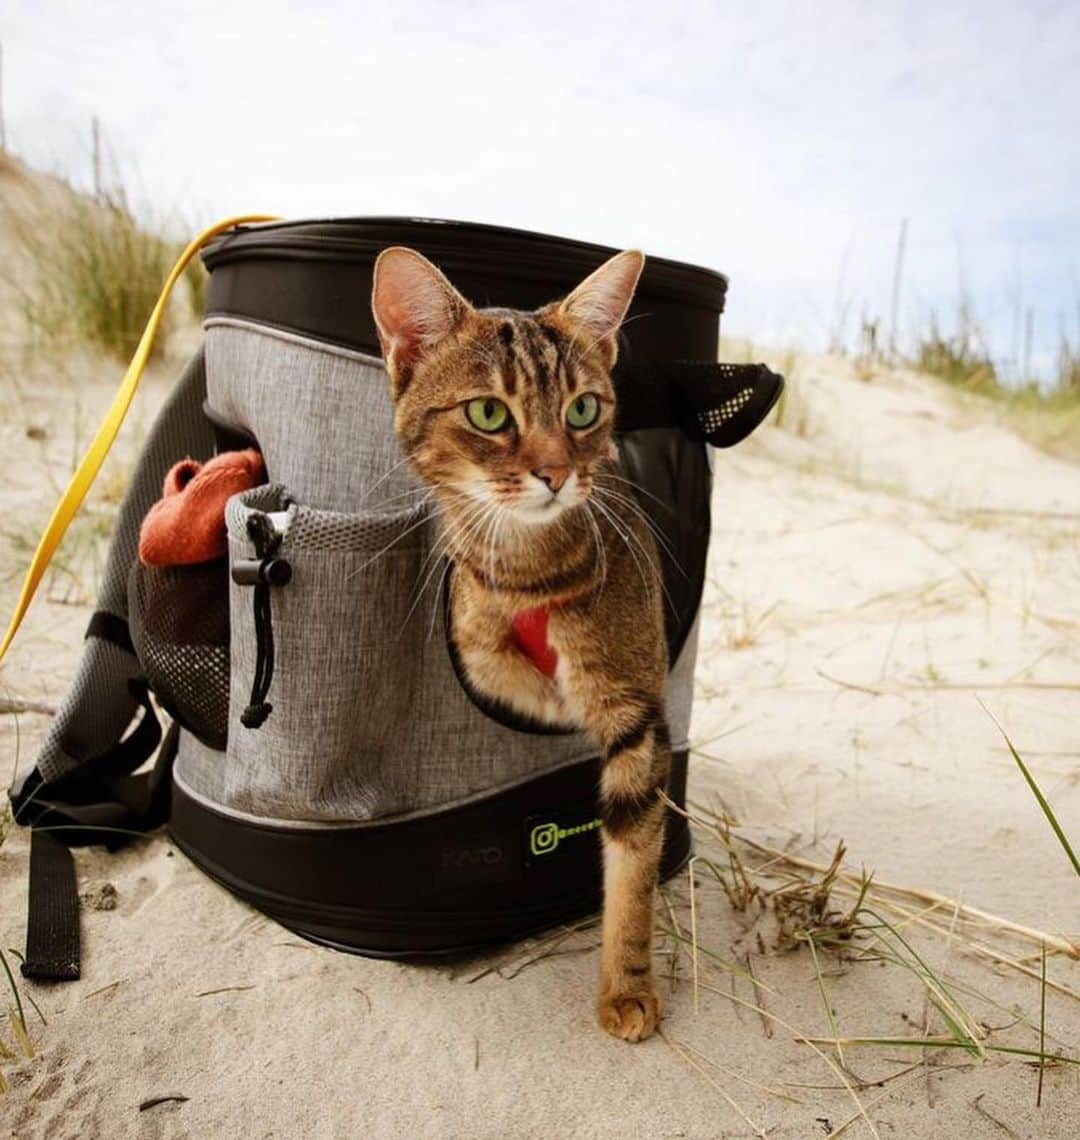 Bolt and Keelのインスタグラム：「Does your adventure kitty prefer walking on a leash or riding in a pack? 🎒🐾 Lando and Pascha enjoy both!!🤍  @adventrapets ➡️ @meowingadventures  —————————————————— Follow @adventrapets to meet cute, brave and inspiring adventure pets from all over the world! 🌲🐶🐱🌲  • TAG US IN YOUR POSTS to get your little adventurer featured! #adventrapets ——————————————————」